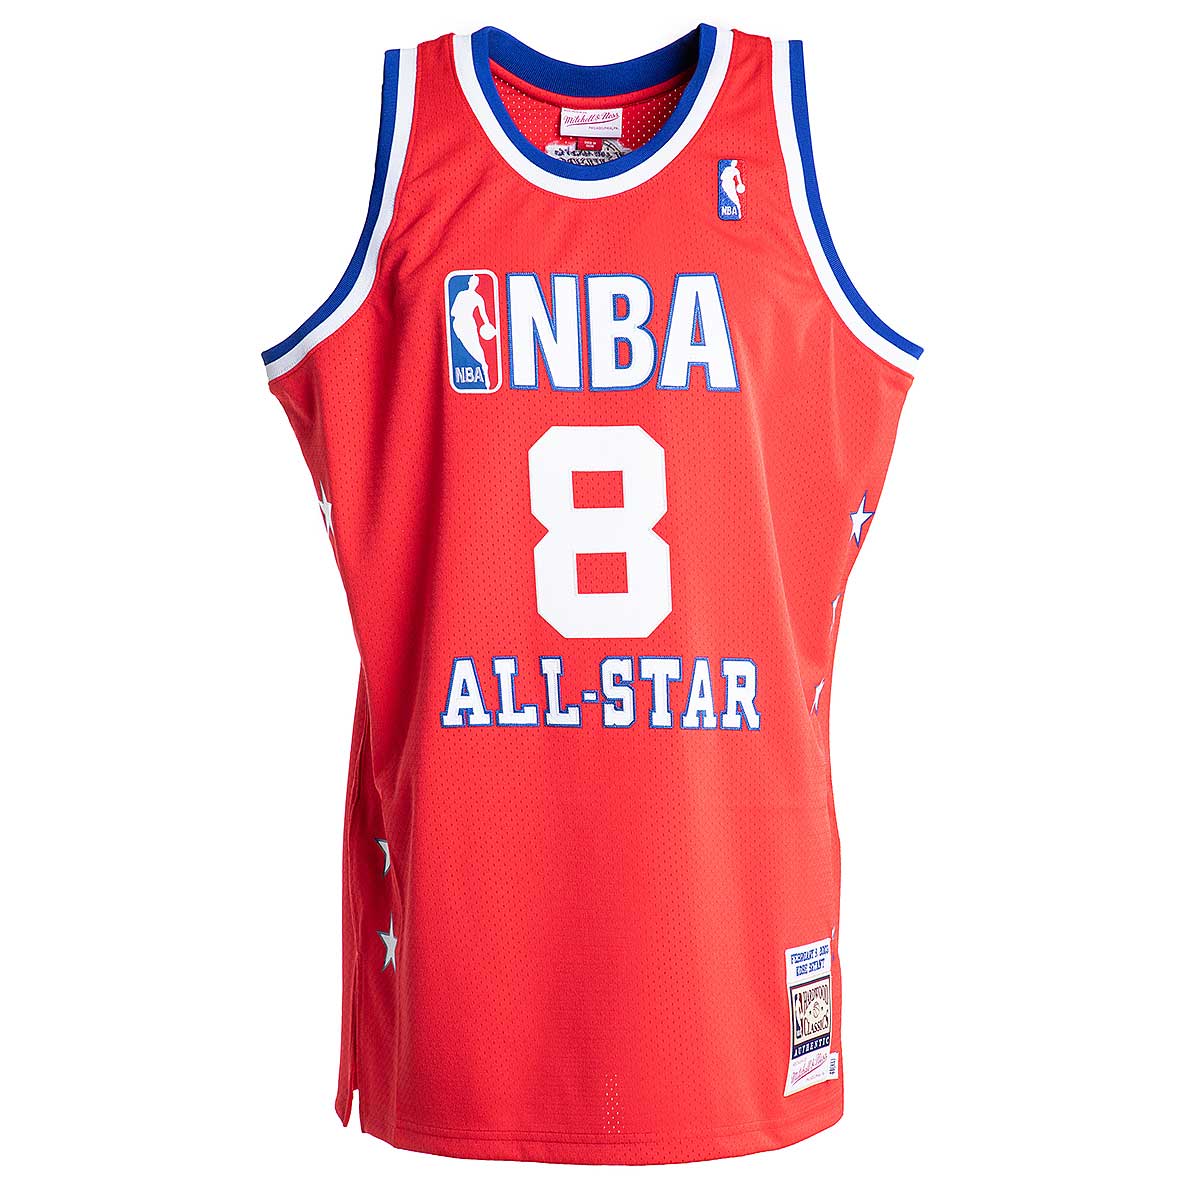 Buy NBA ALL STAR WEST 2003 KOBE BRYANT AUTHENTIC JERSEY for EUR 269.90 on  !